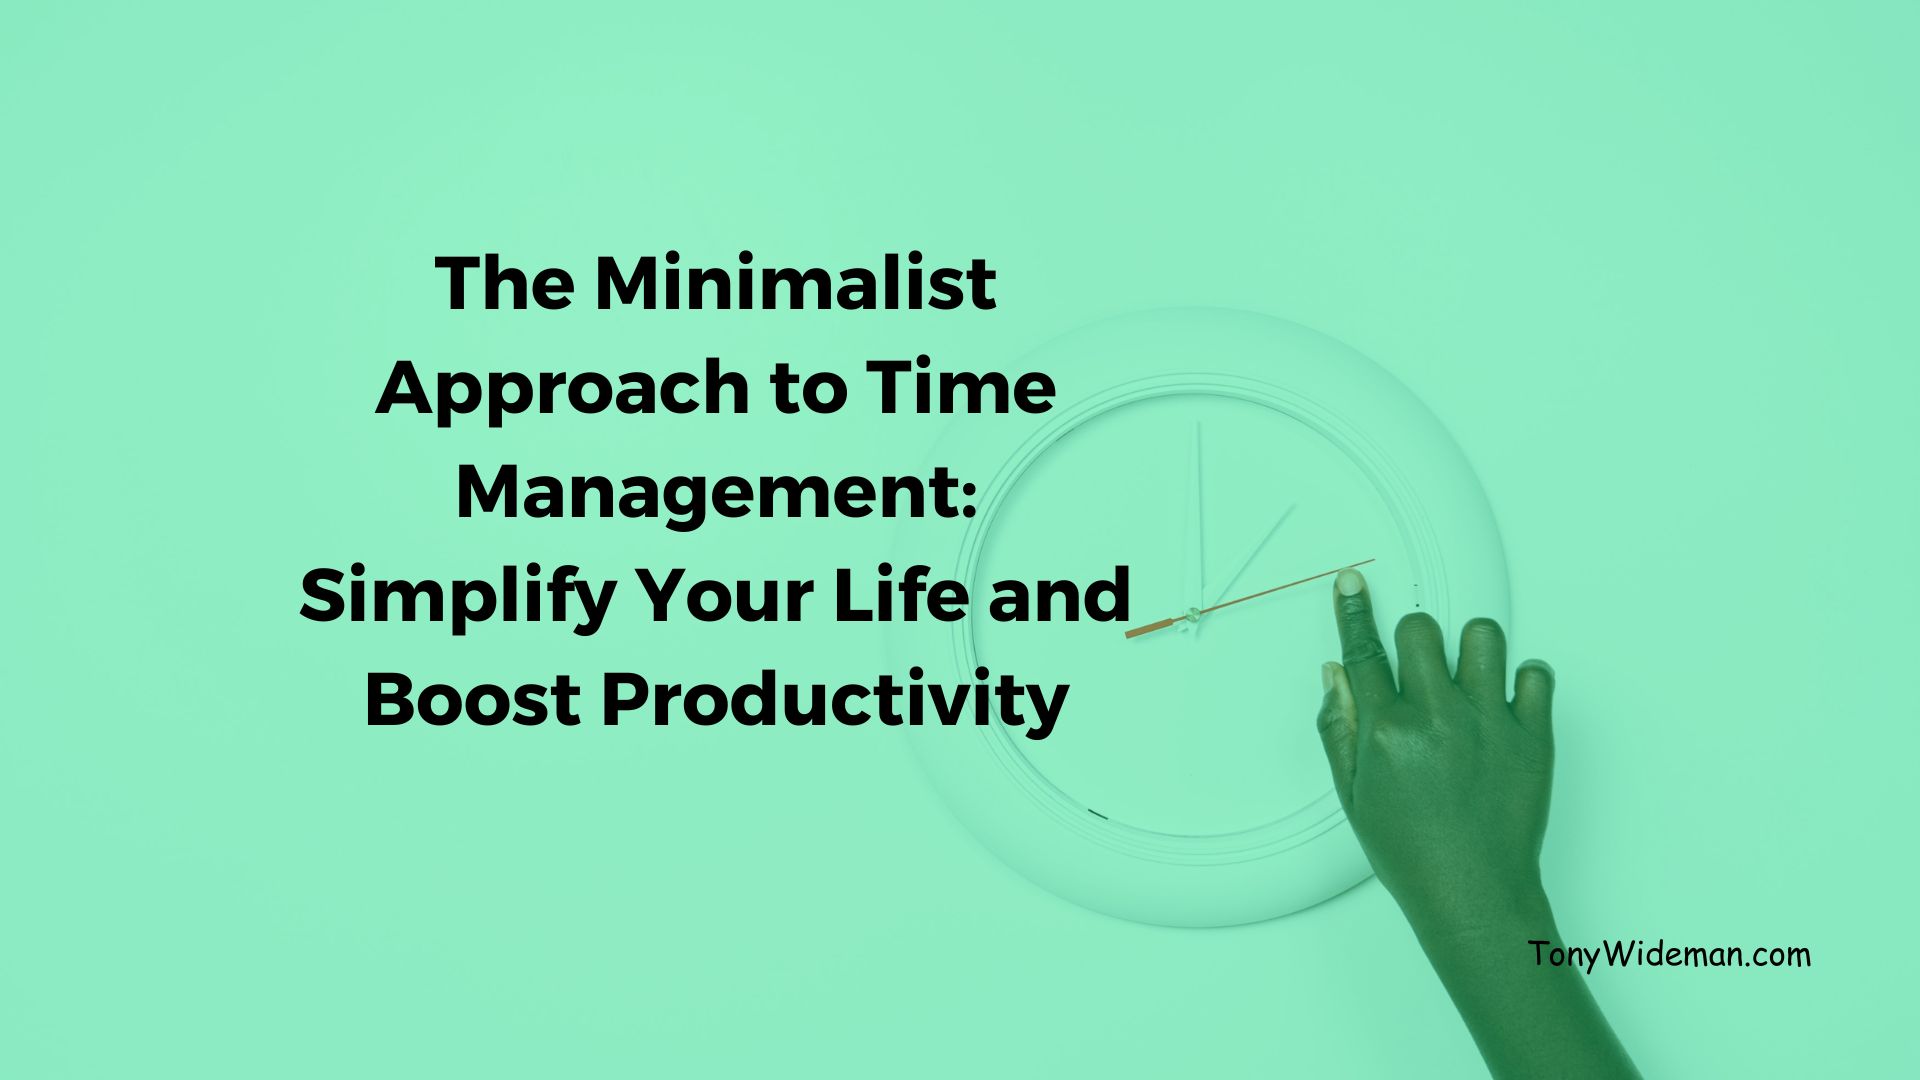 The Minimalist Approach to Time Management: Simplify Your Life and Boost Productivity